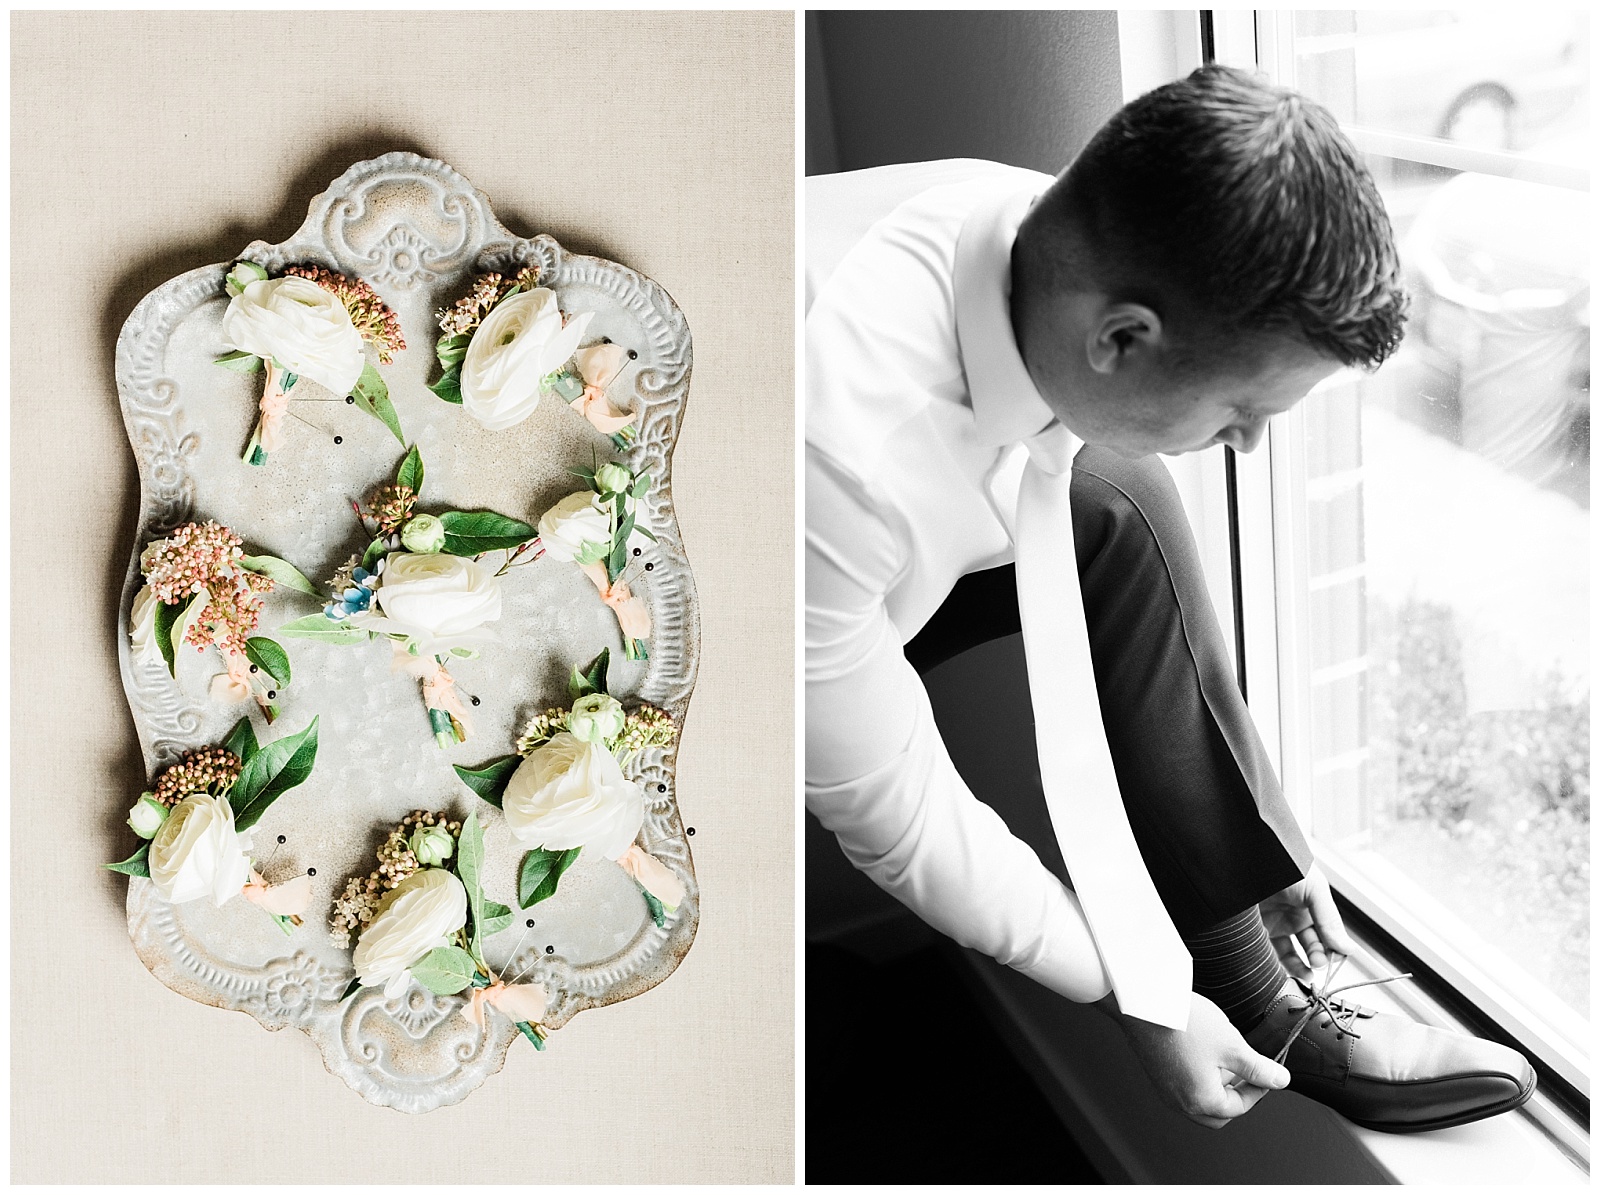 A tray of boutonnieres paired with a photo of a groom putting his shoes on.